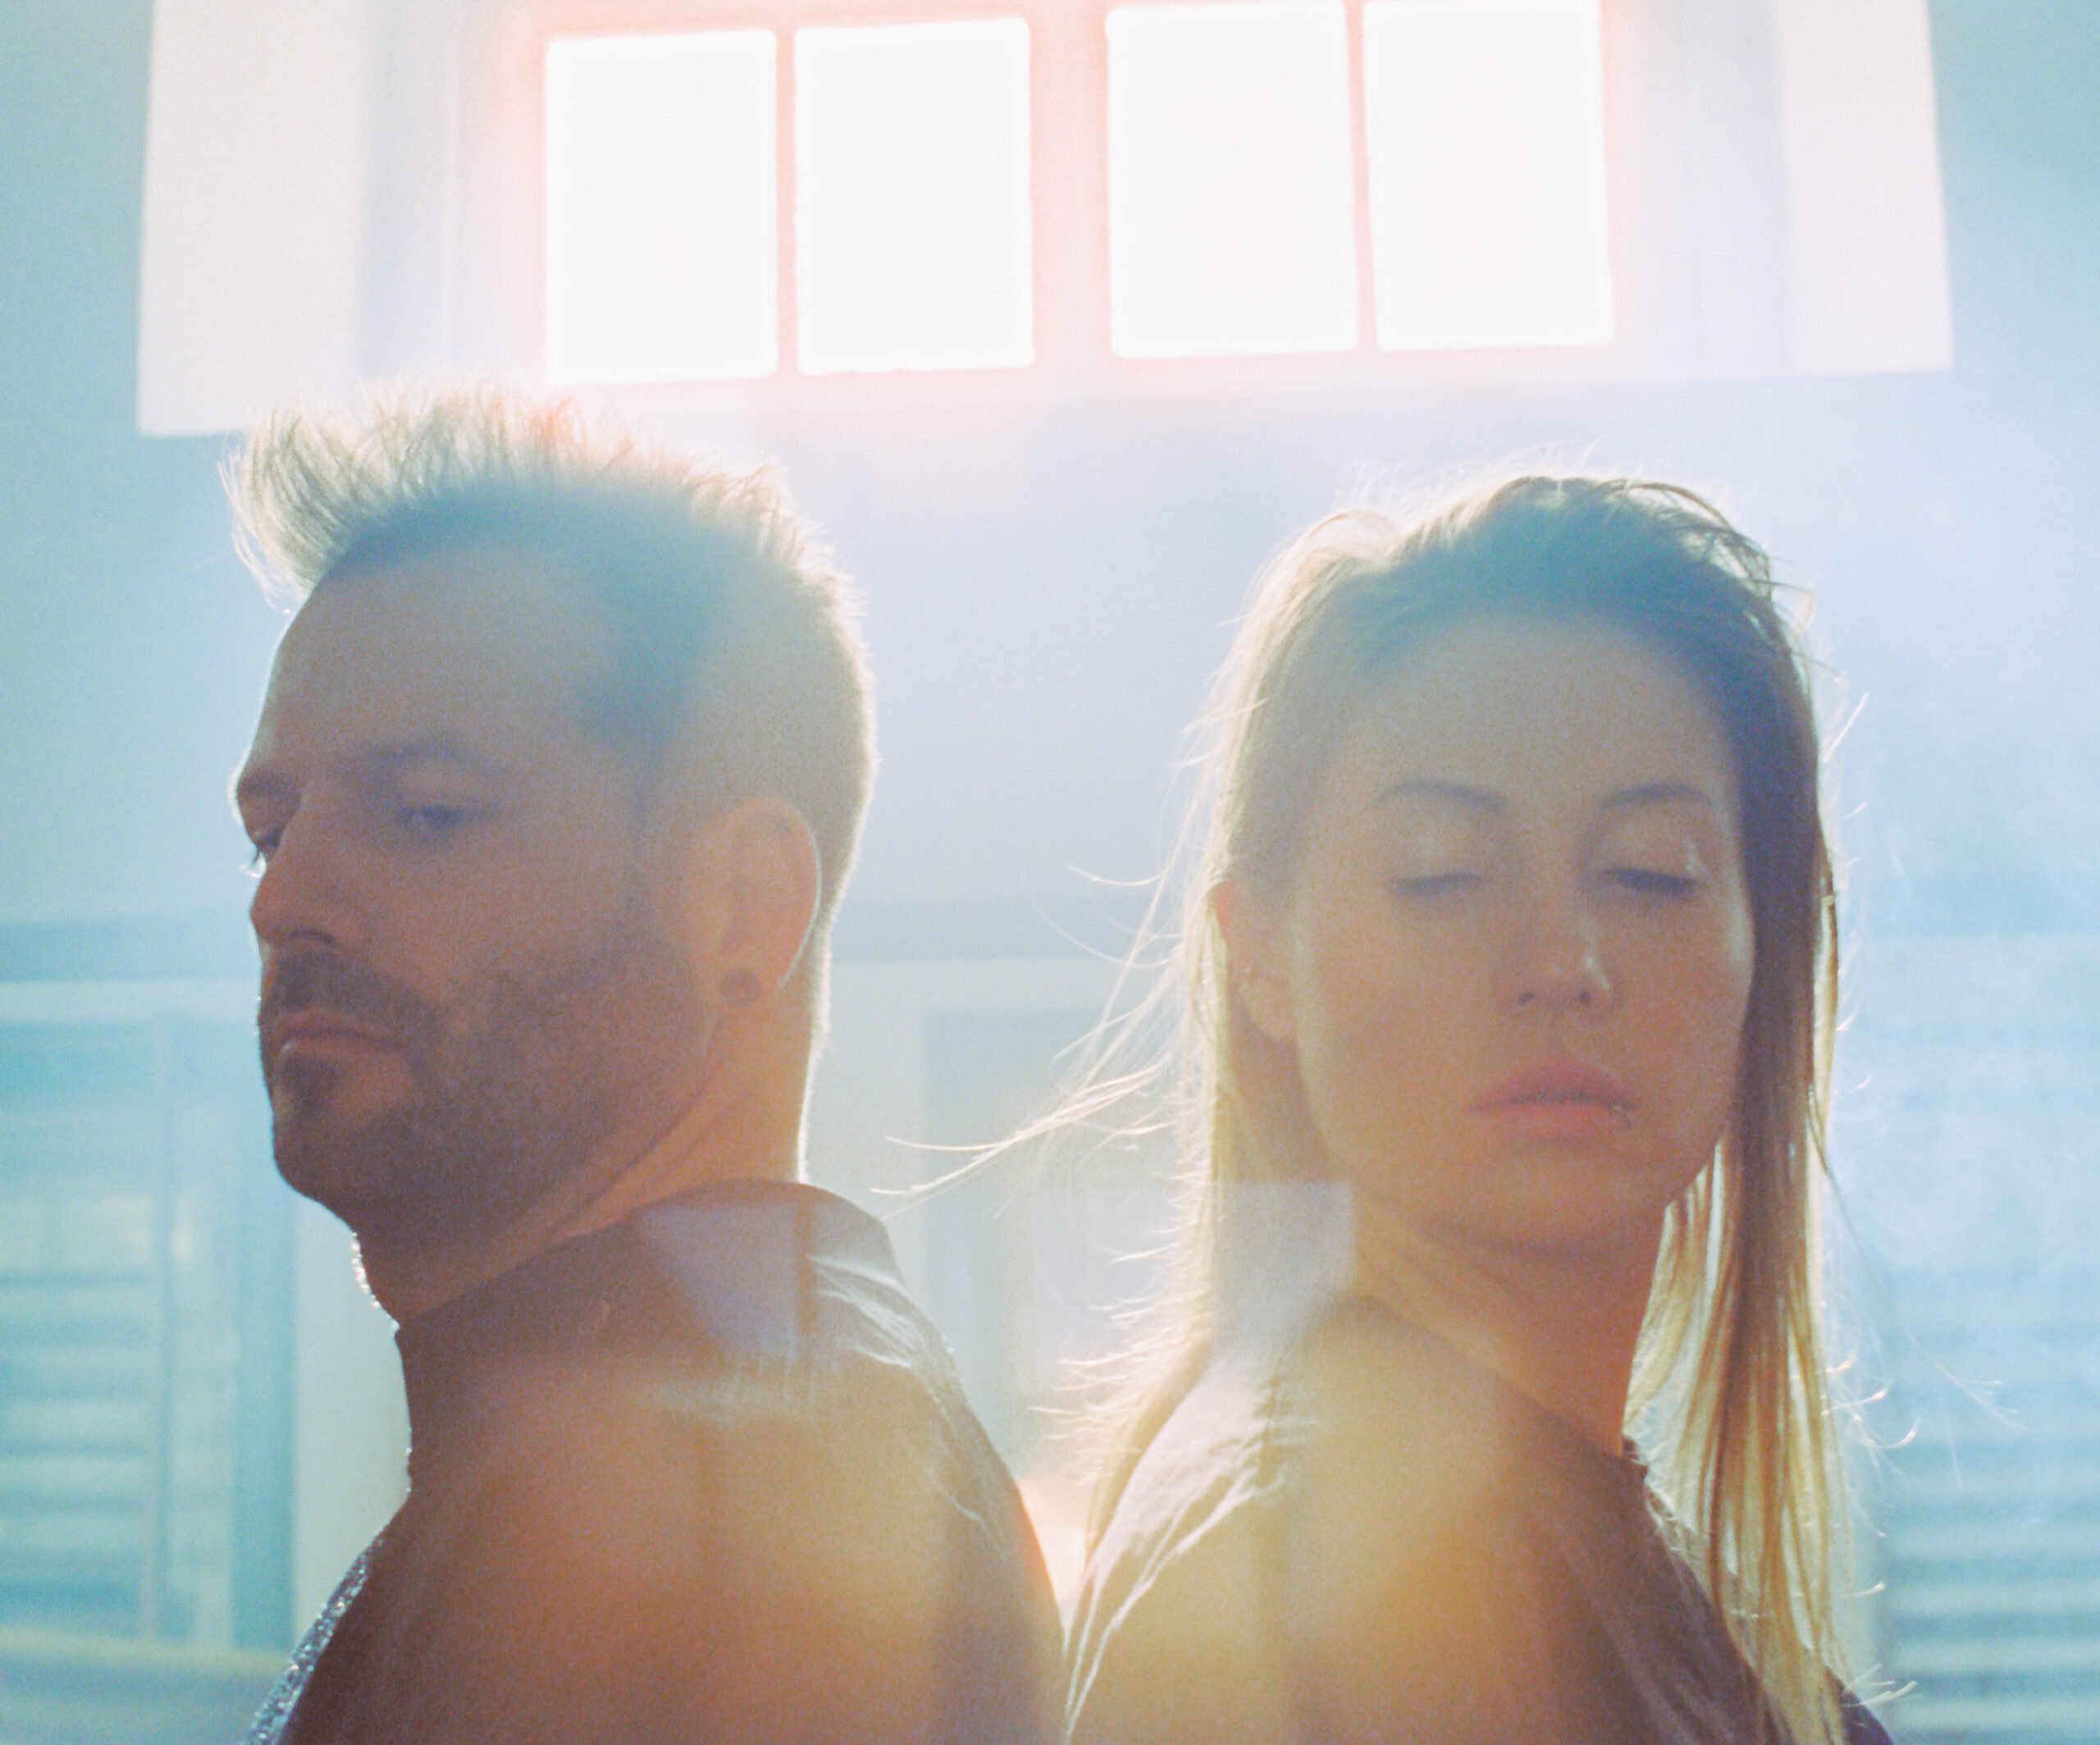 Enrico Sangiuliano and Charlotte de Witte Release First Collaborative EP “Reflection”